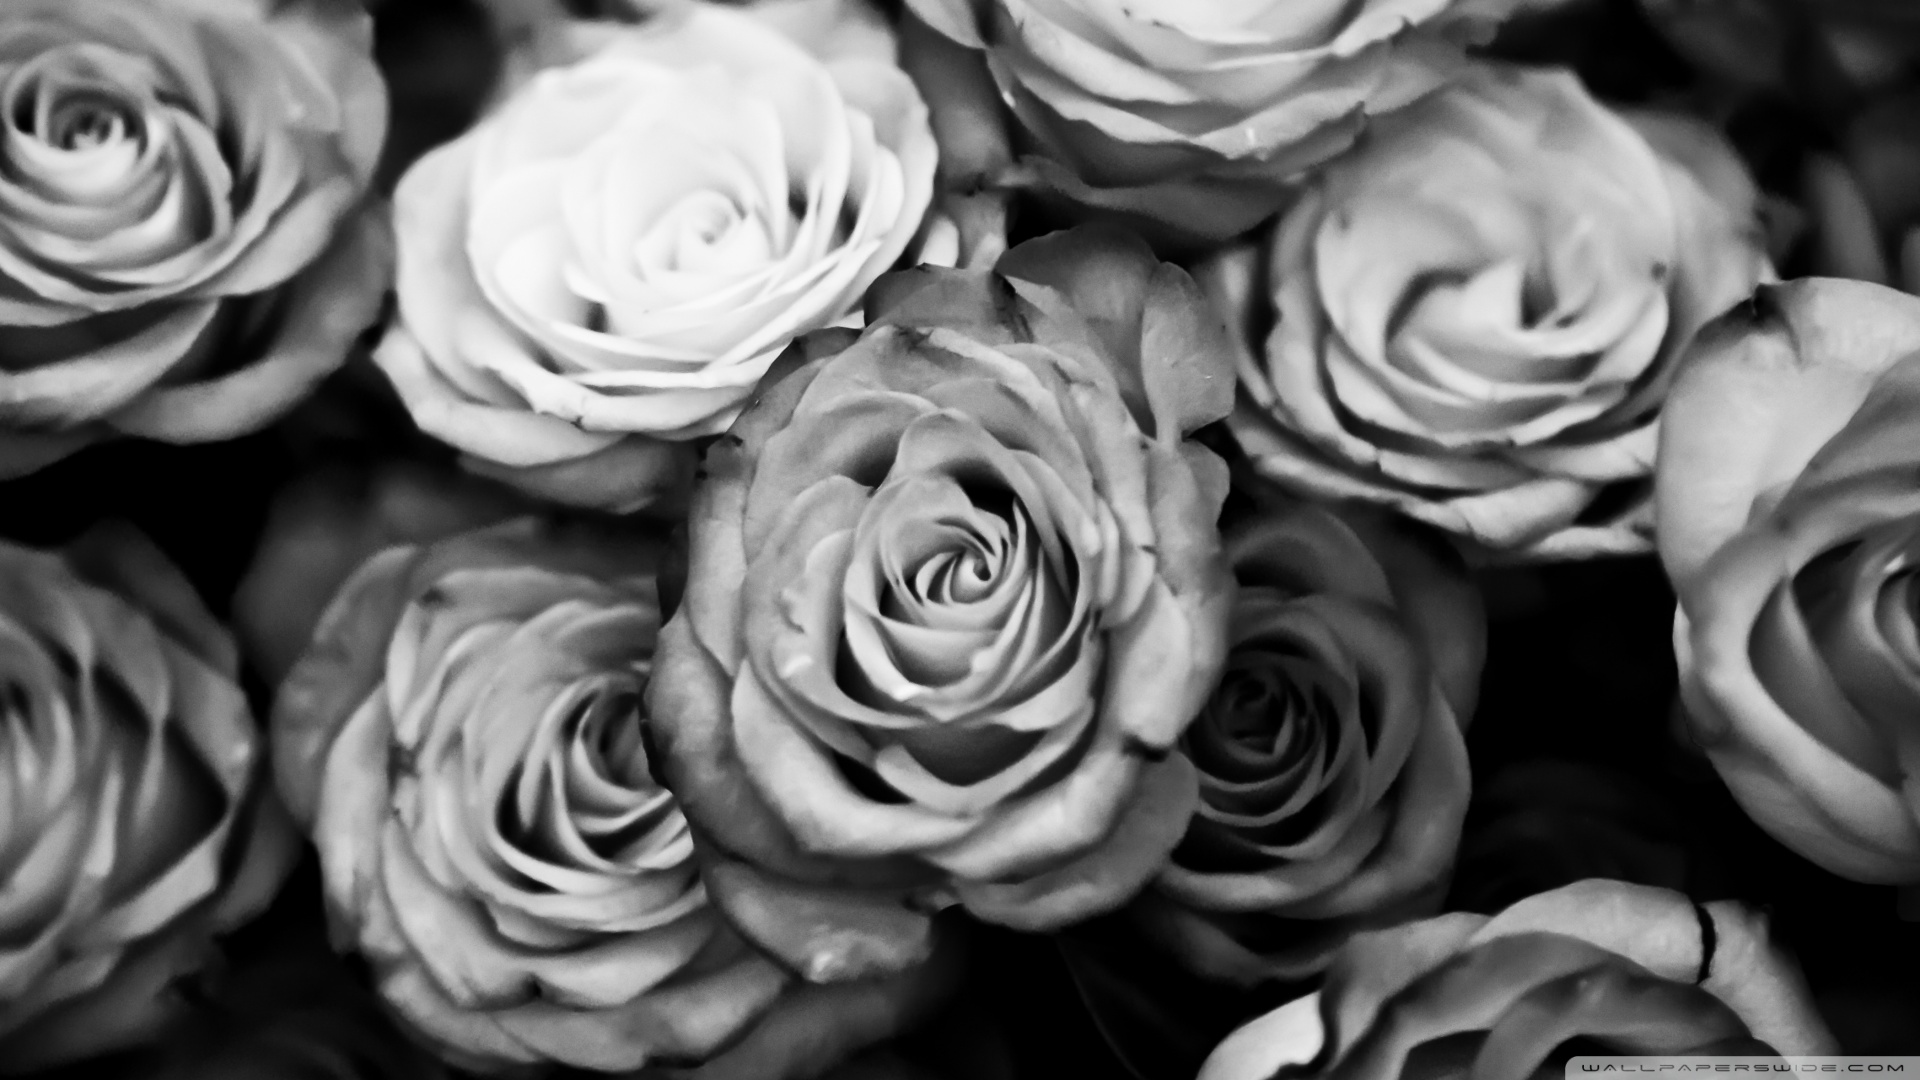 You Can Black And White Roses In Your Puter By Clicking